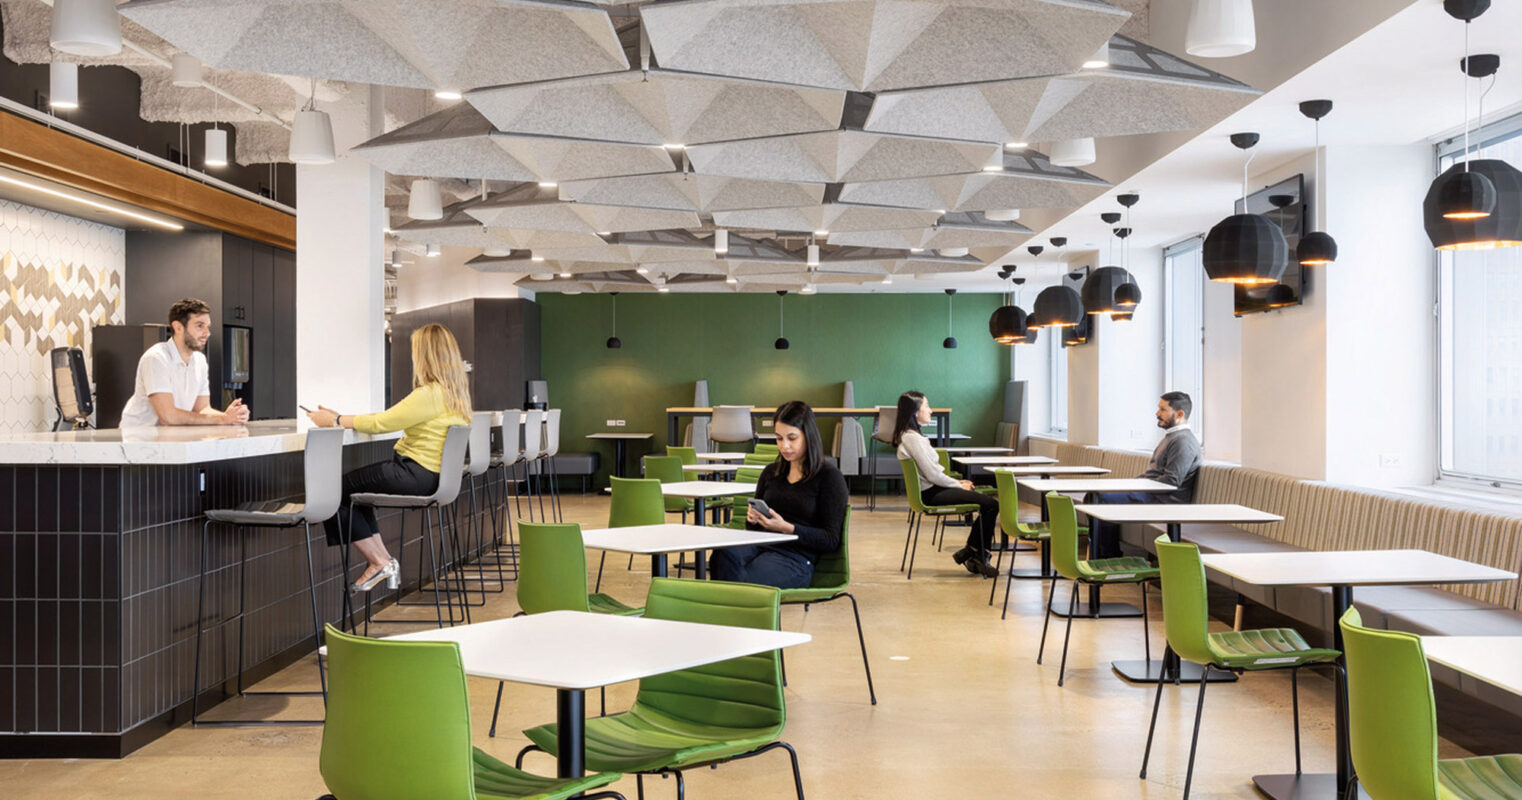 Modern office break room featuring acoustical ceiling panels, black pendant lighting, and lime green chairs paired with natural wood tables. People are casually interacting, reflecting functional design promoting productivity and social interaction.